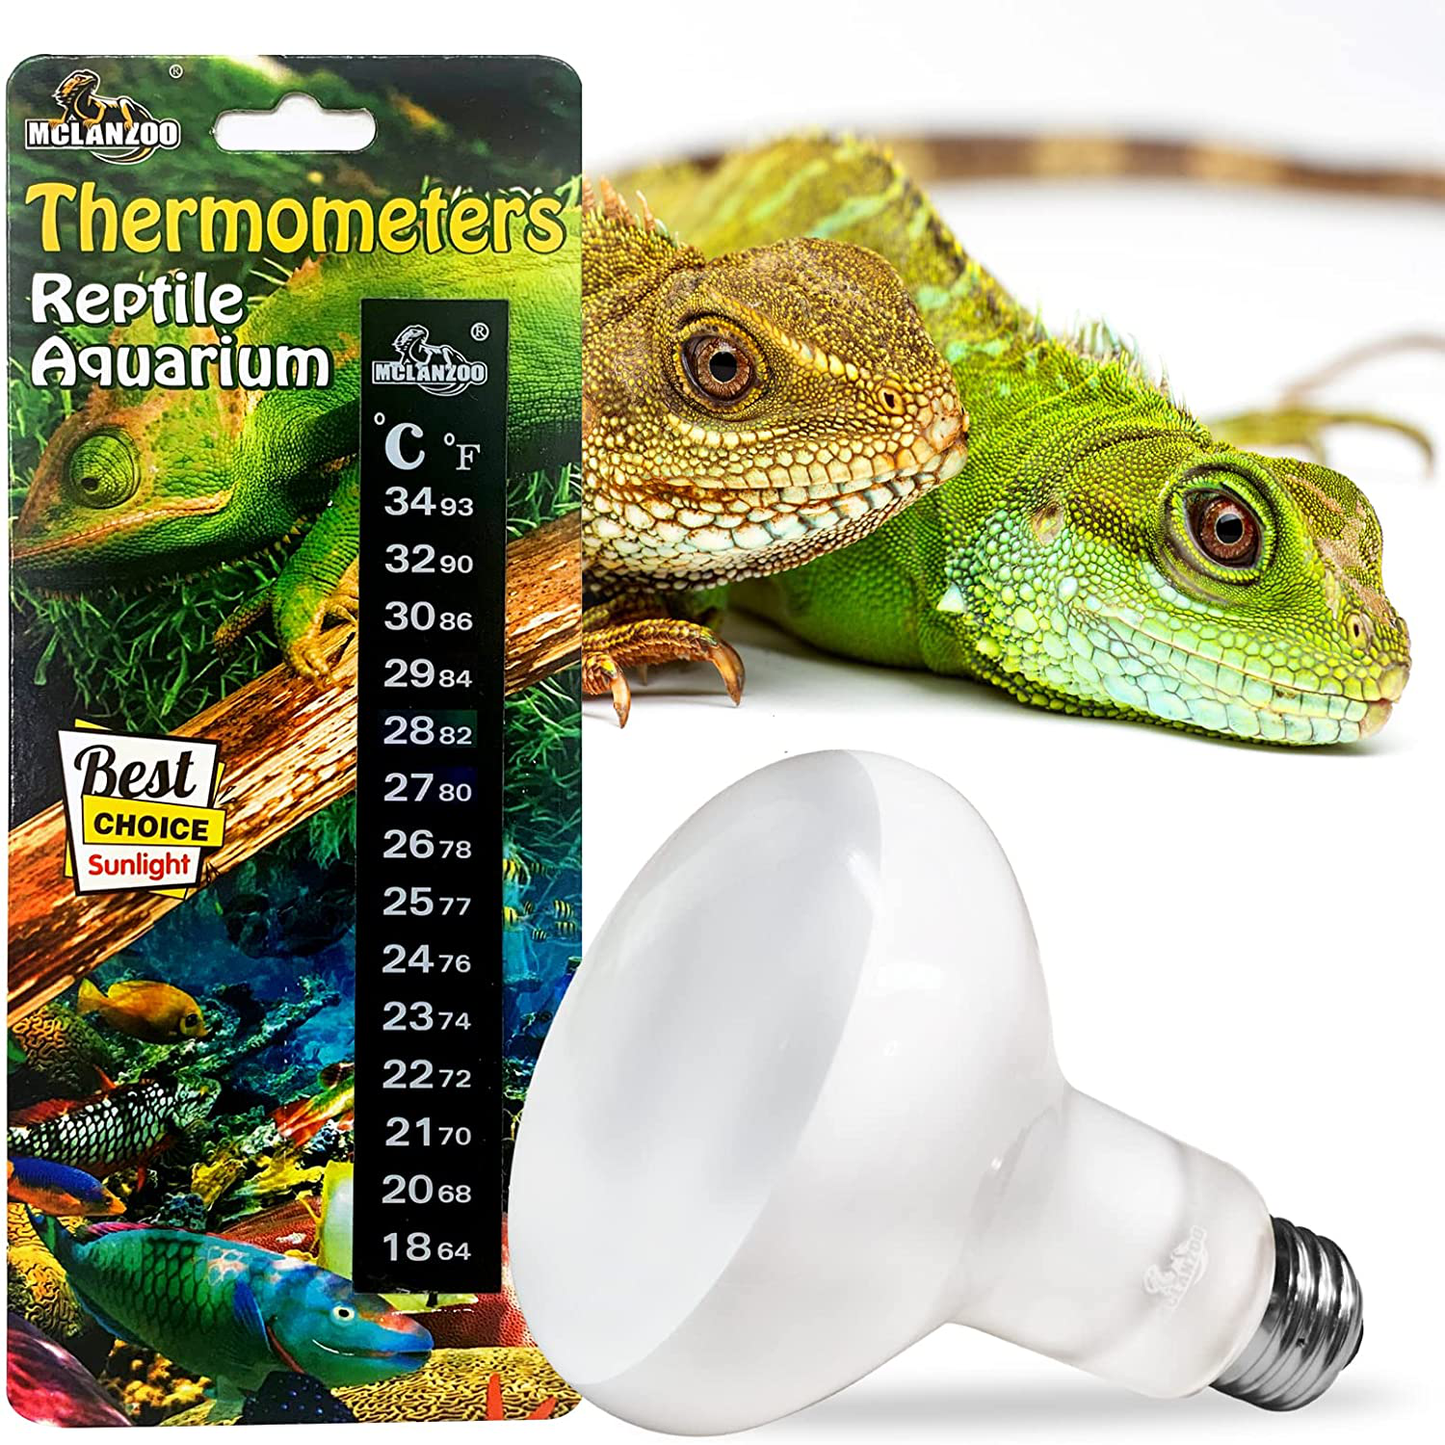 MCLANZOO 2 Pack 75W Reptile Heat Lamp Bulb/Light, UVA Basking Spot Heat Lamp for Lizard,Tortoise,Bearded Dragon, Hedgehogs Reptiles & Amphibians with Stick-On Digital Temperature Thermometer